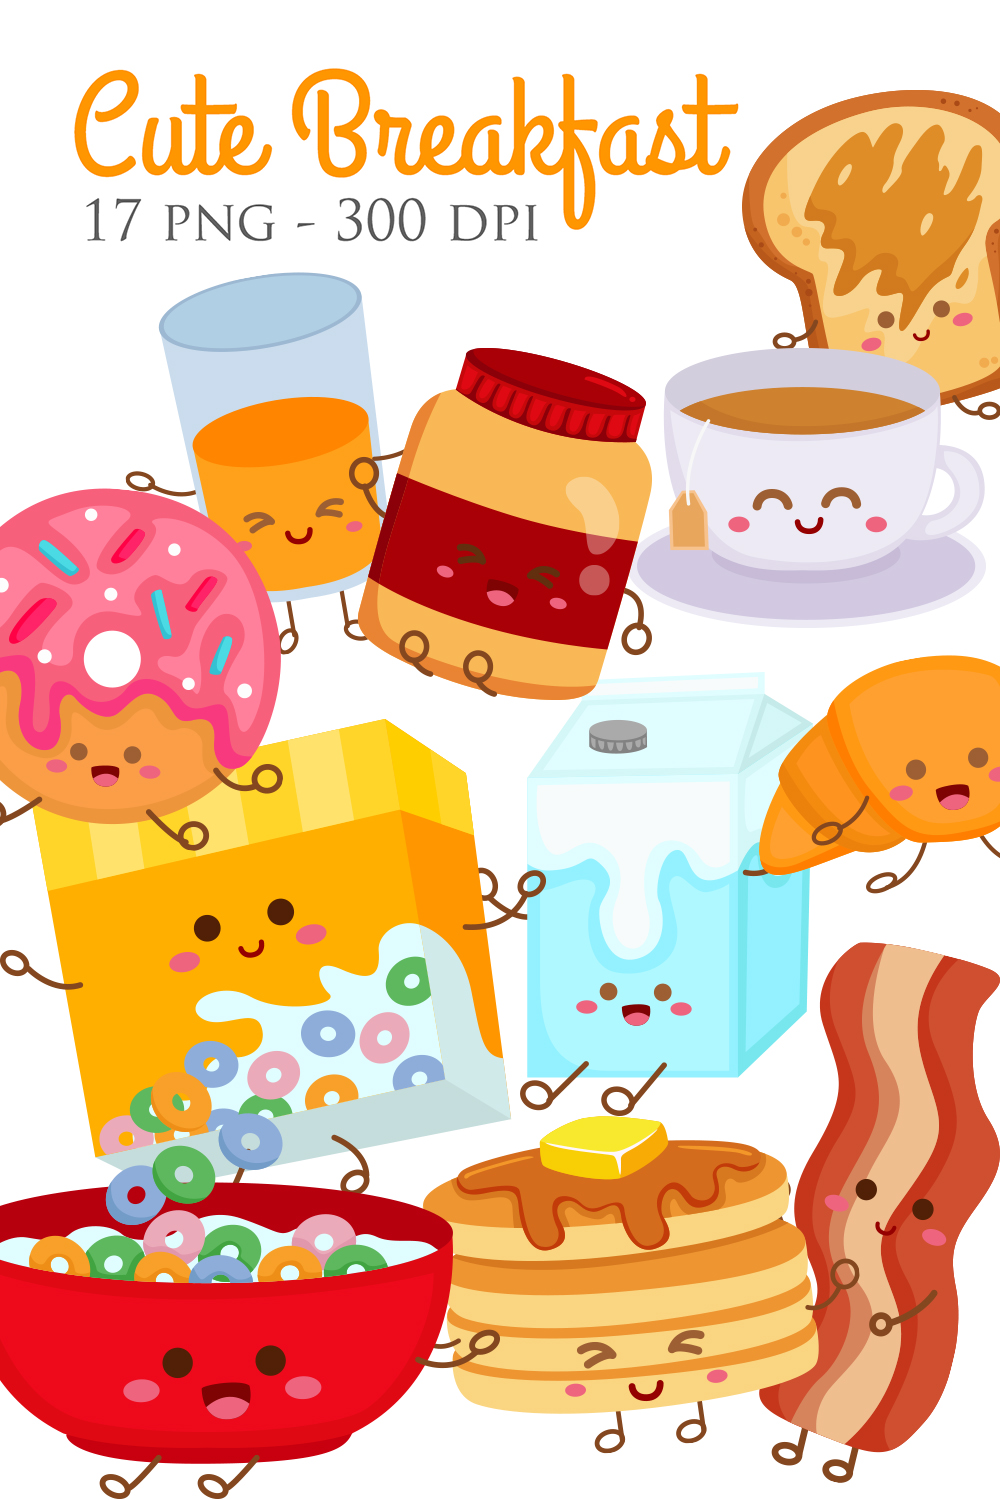 Delicious Breakfast Food and Drink Cereal Bacon Sunny Side Egg Cheese Sausage Doughnut Bread Toast Jam Tea Coffee Illustration Vector Clipart Cartoon pinterest preview image.